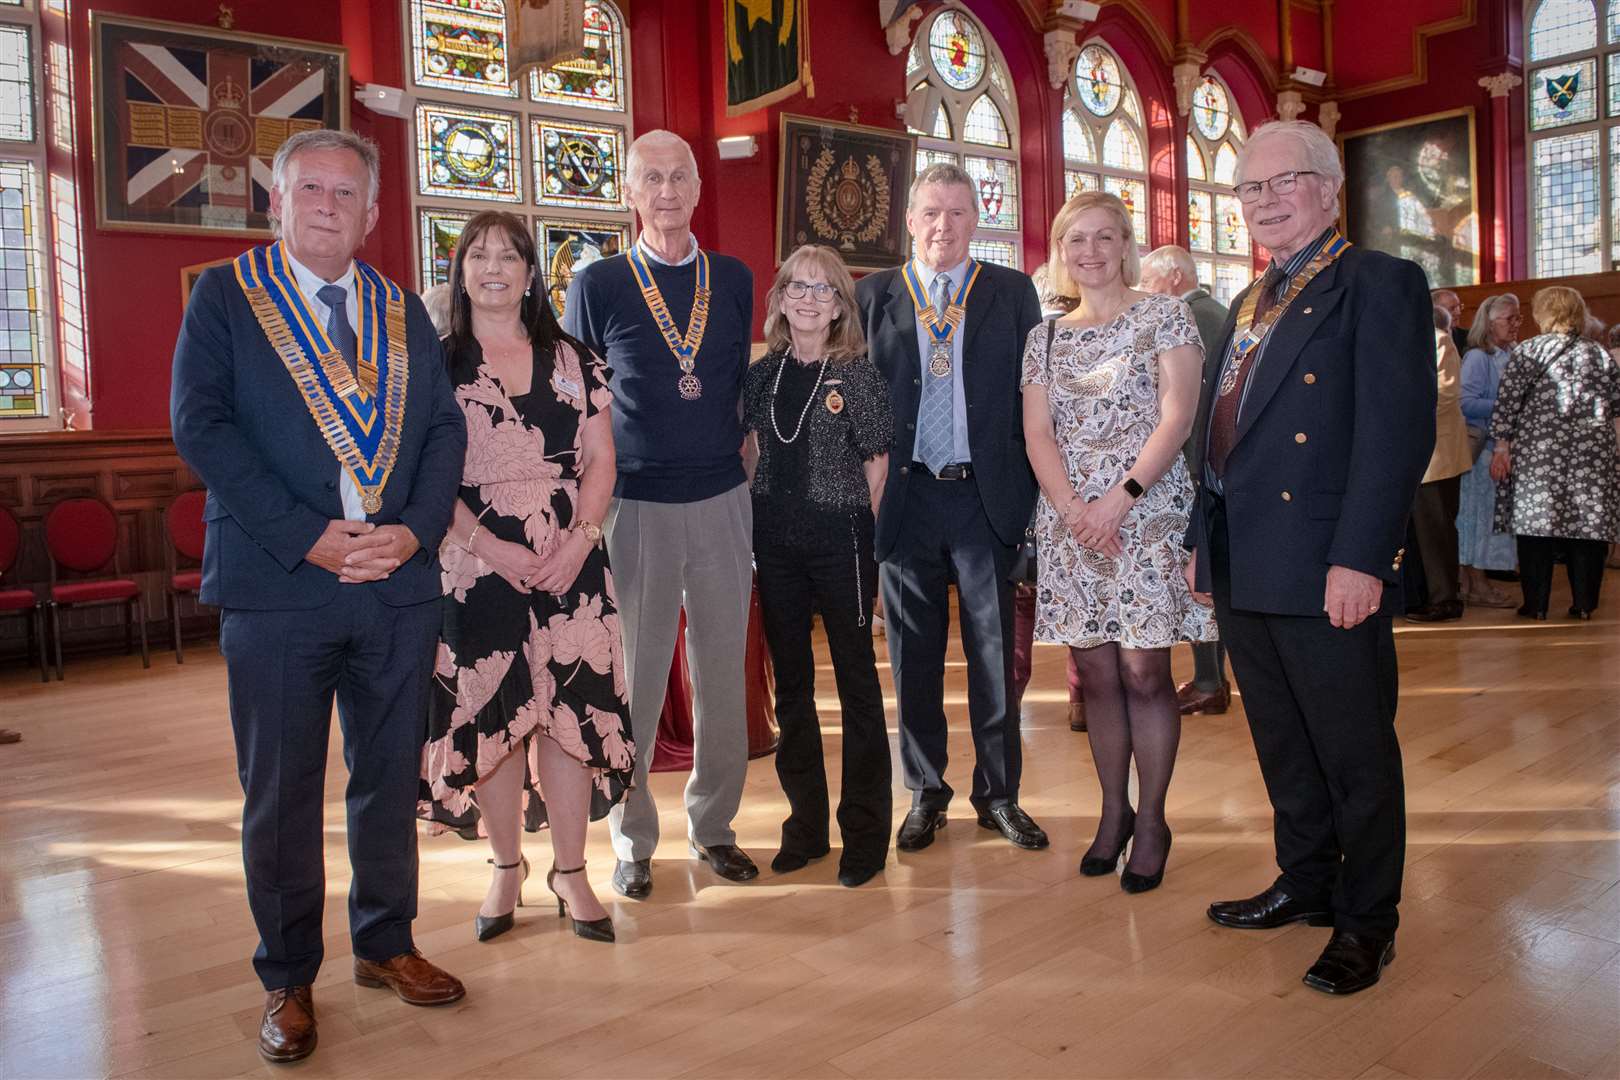 Celebrating the centenary of the Rotary Club of Inverness are president Alan Nelson, Morven Reid, Alan Goff, Inverness Provost Glynis Campbell-Sinclair, Alex Craib, Jackie Hendry and Ormond Smith.